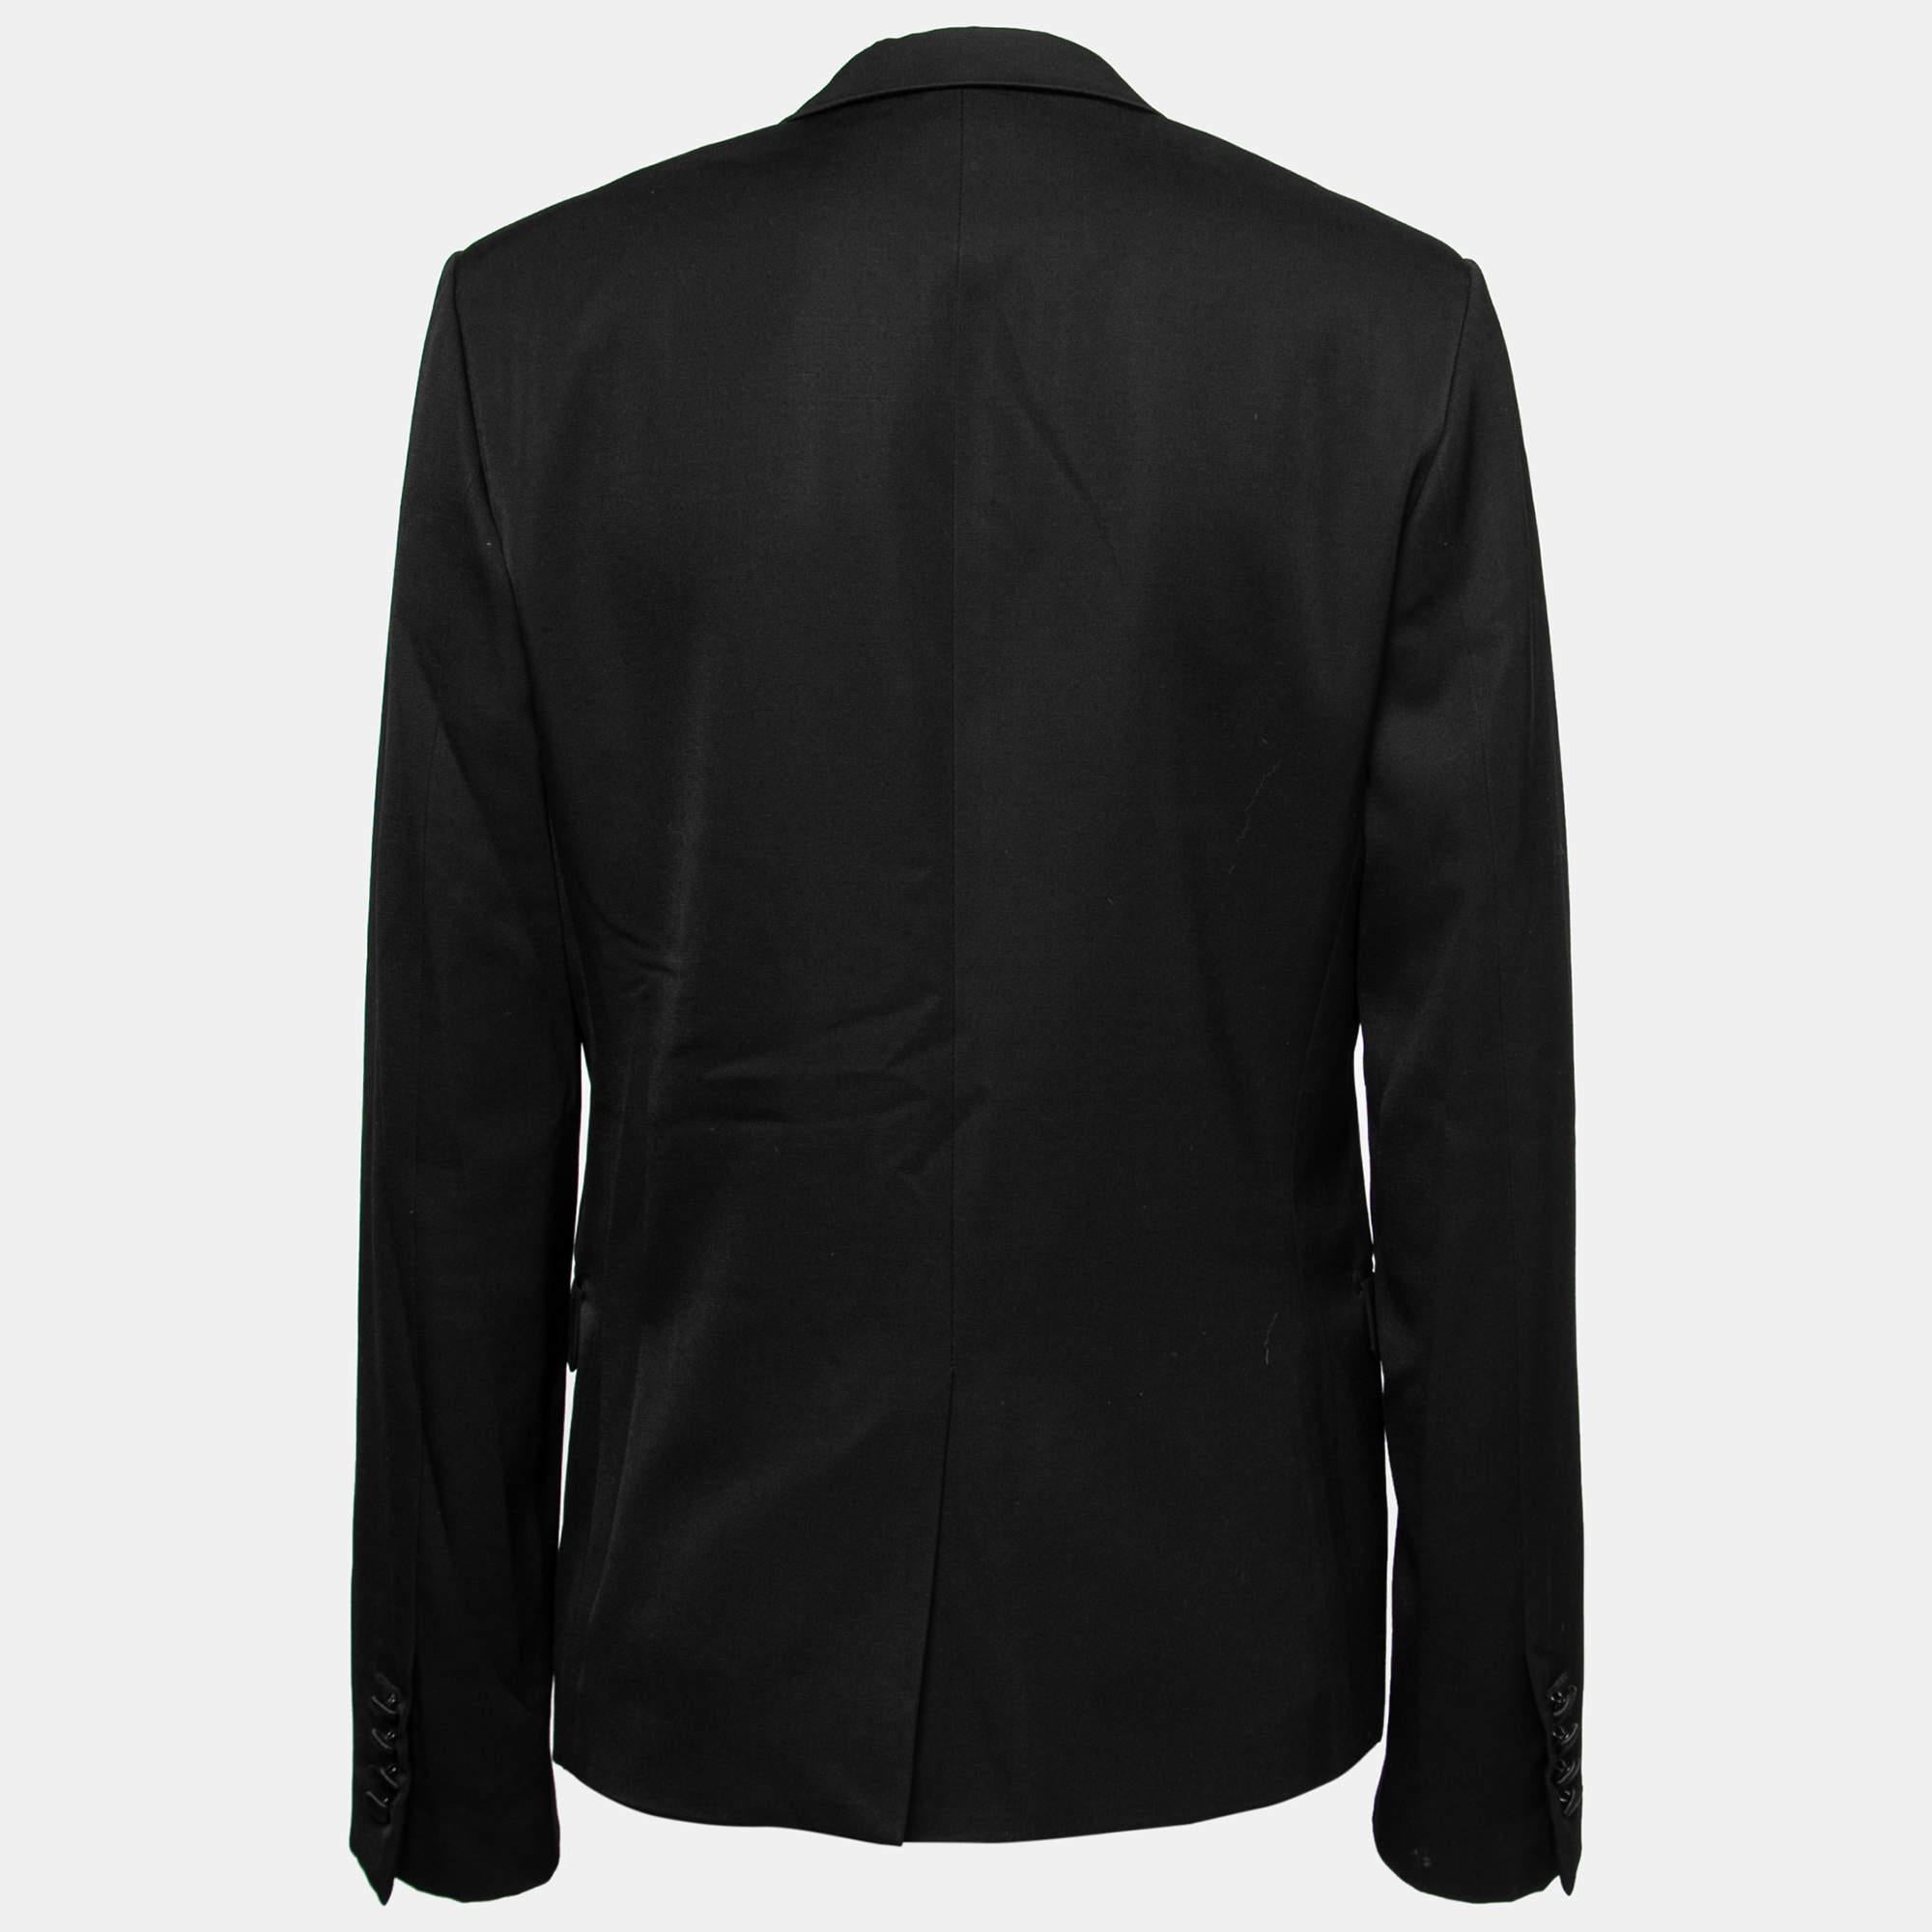 Finely tailored and stunning, this blazer from the House of Dior will let you keep your attire on point. It is fashioned using black wool fabric and flaunts buttoned cuffs, long sleeves, and buttoned closures. This blazer is perfect for evening